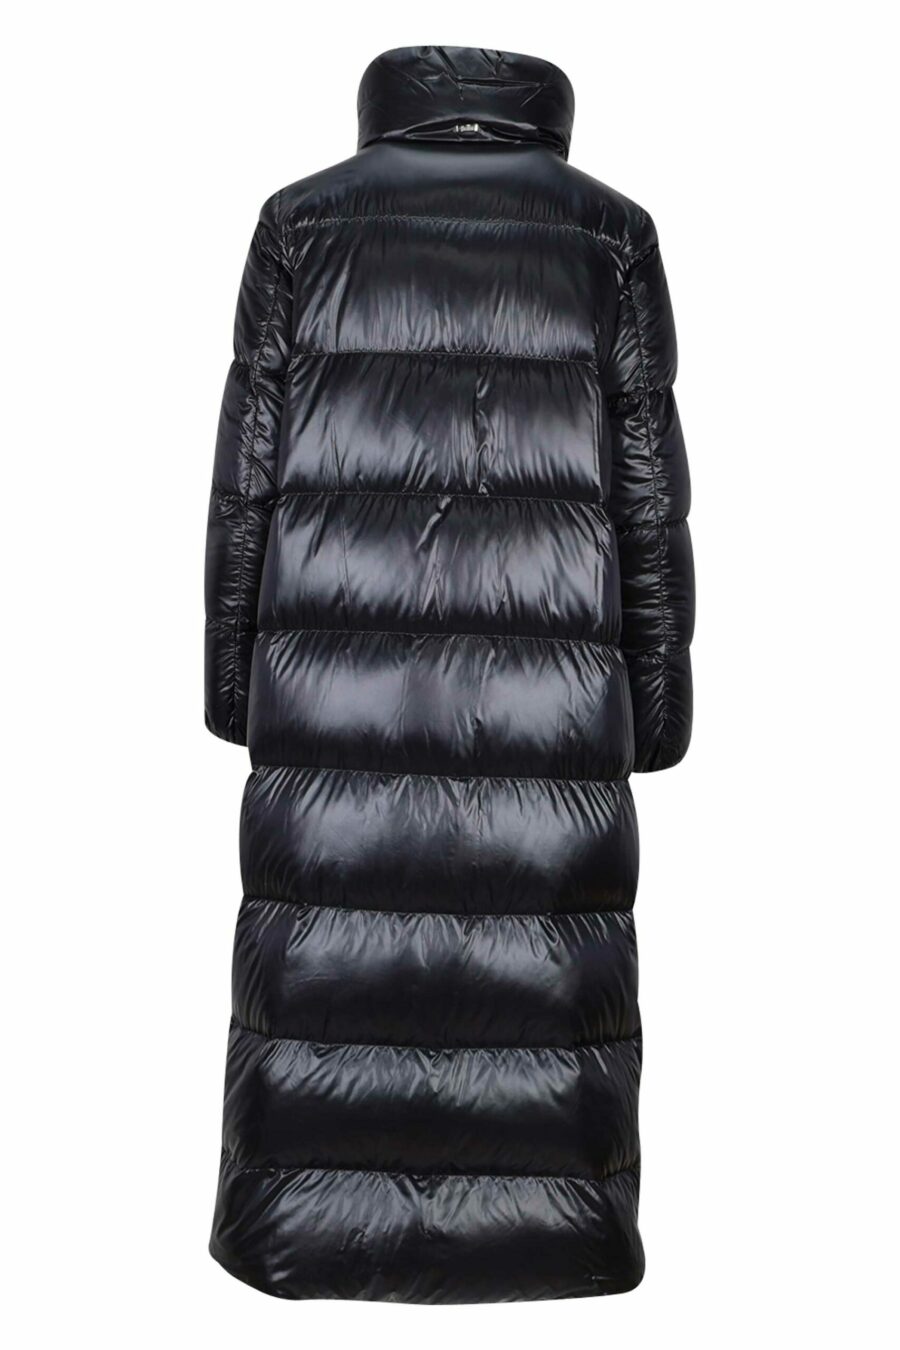 Long black quilted quilted jacket with straight lines - 8055721802237 2 scaled